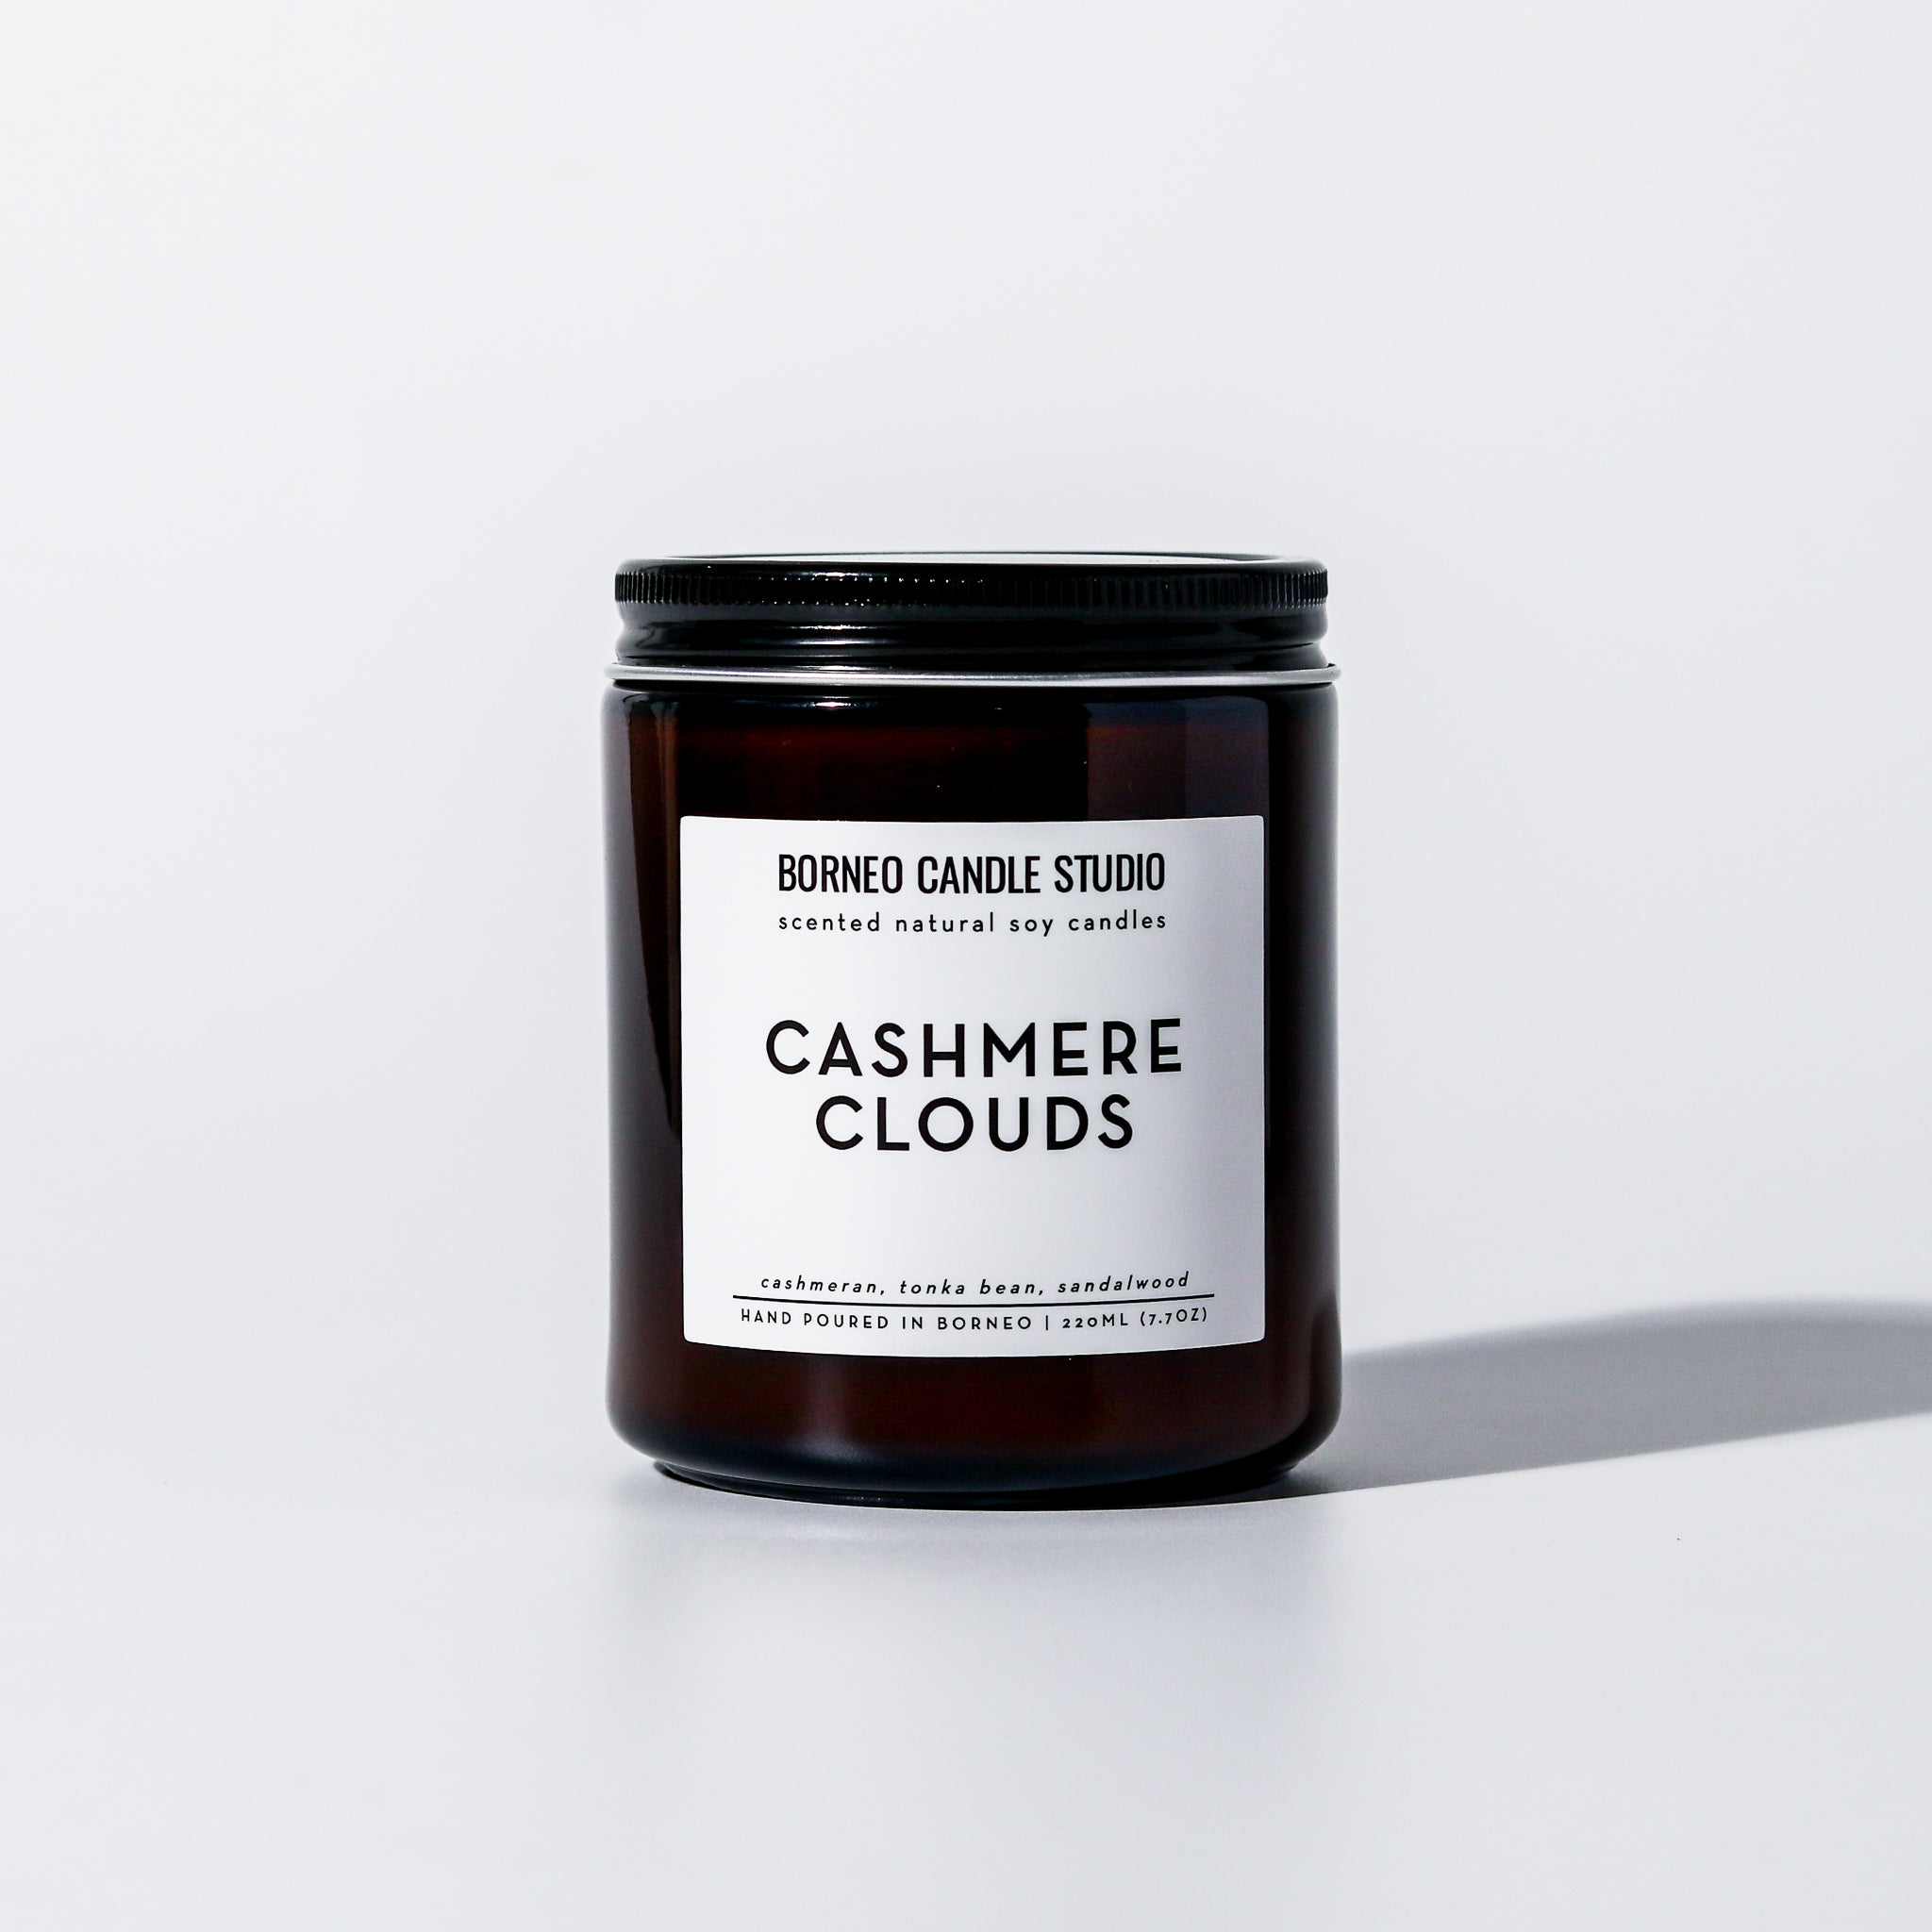 Cashmere Clouds Scented Candle - cashmere, tonka bean, sandalwood scented candle in 7.7 oz amber glass jar with lid